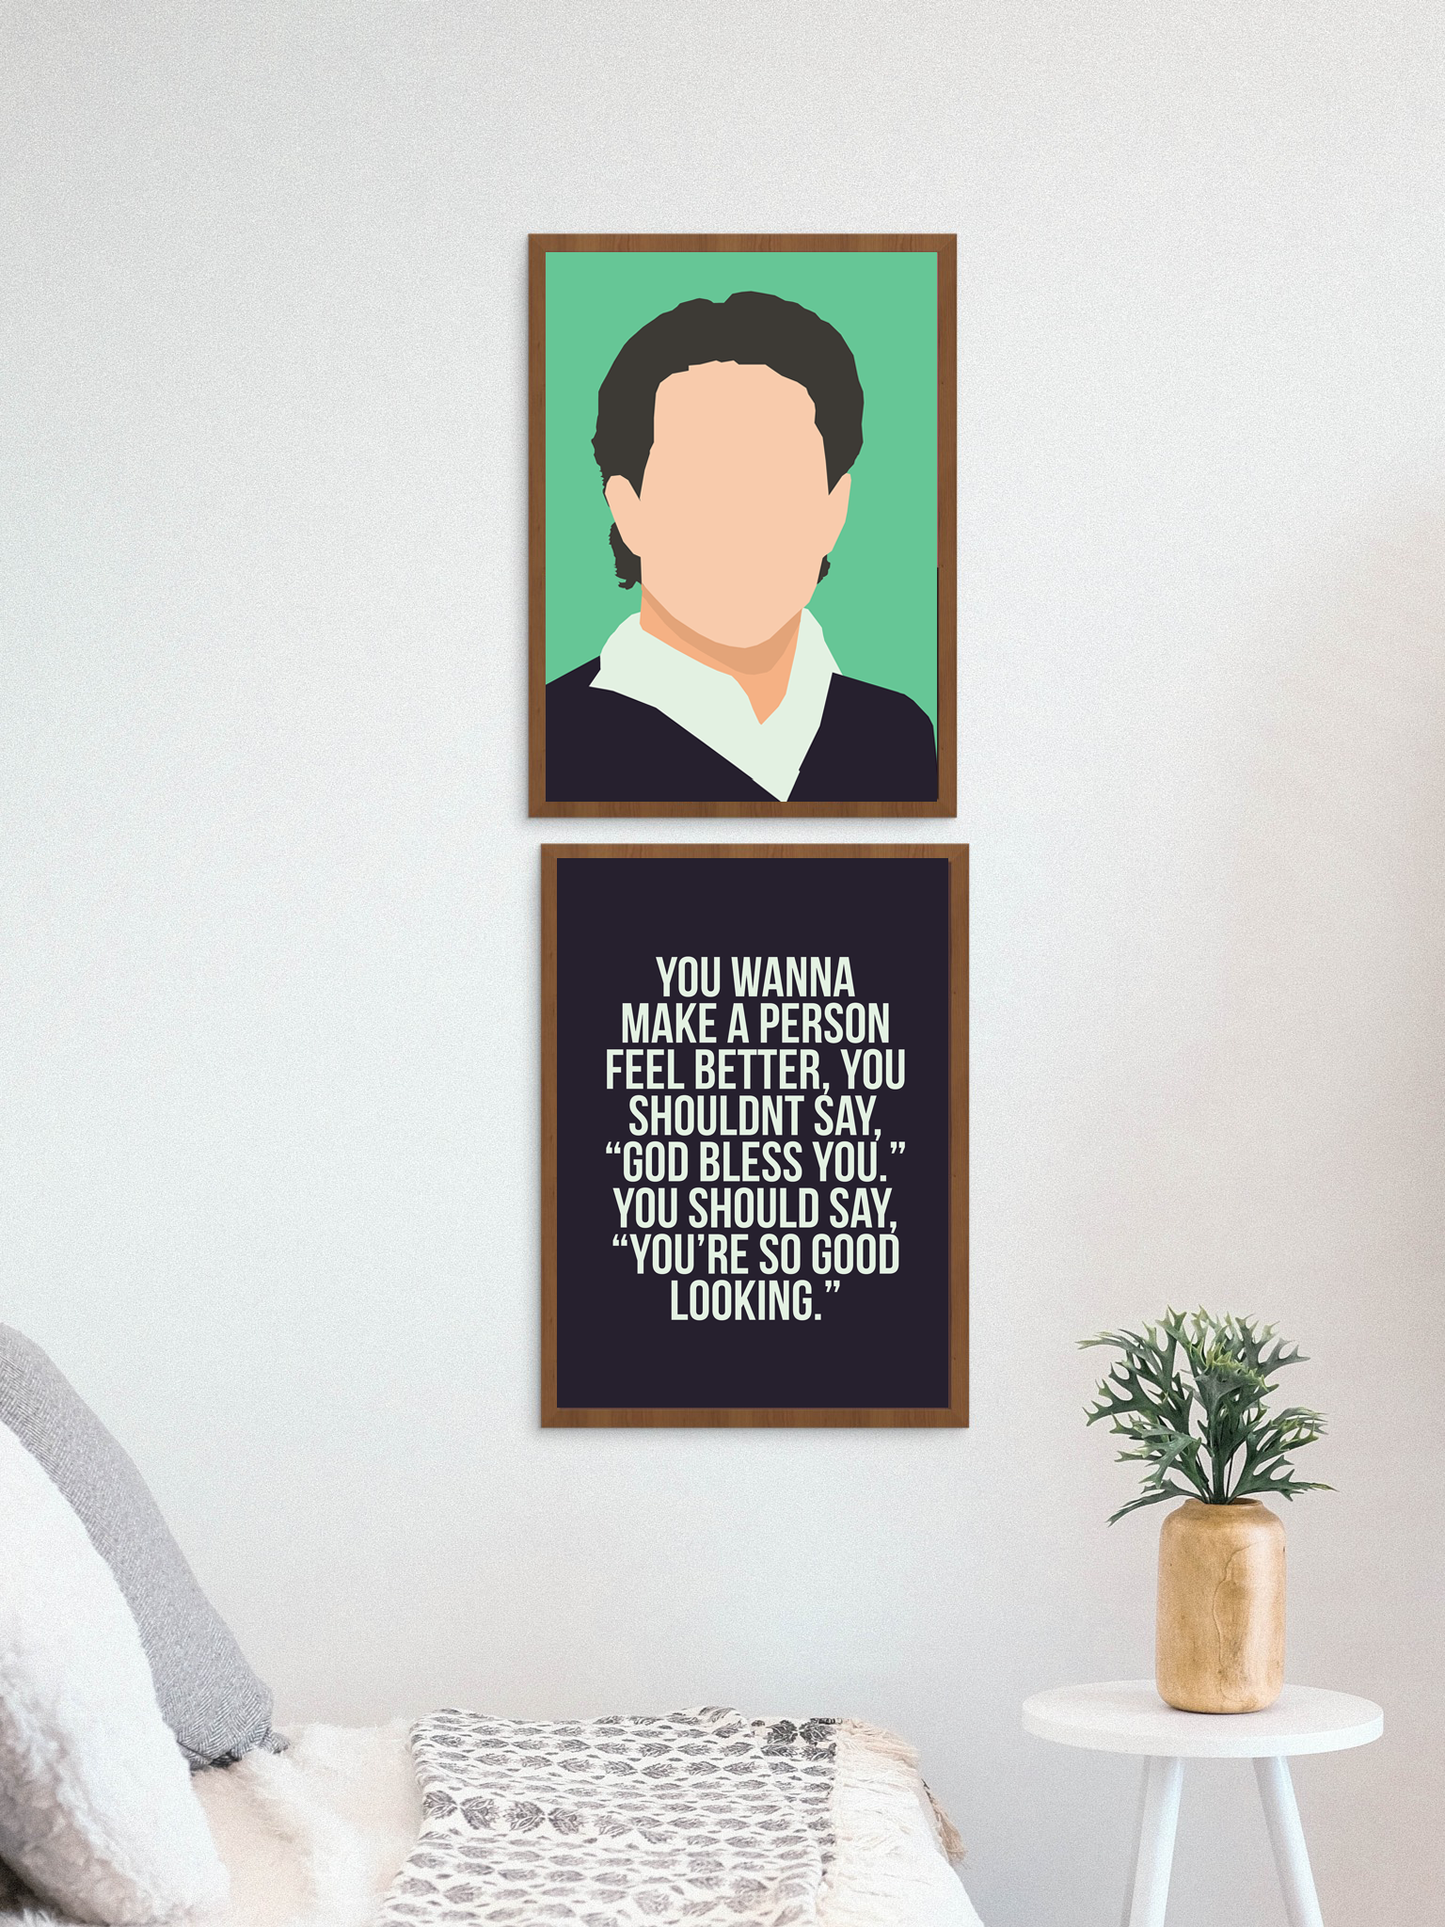 Seinfeld TV show poster set featuring Jerry Seinfeld and funny quote